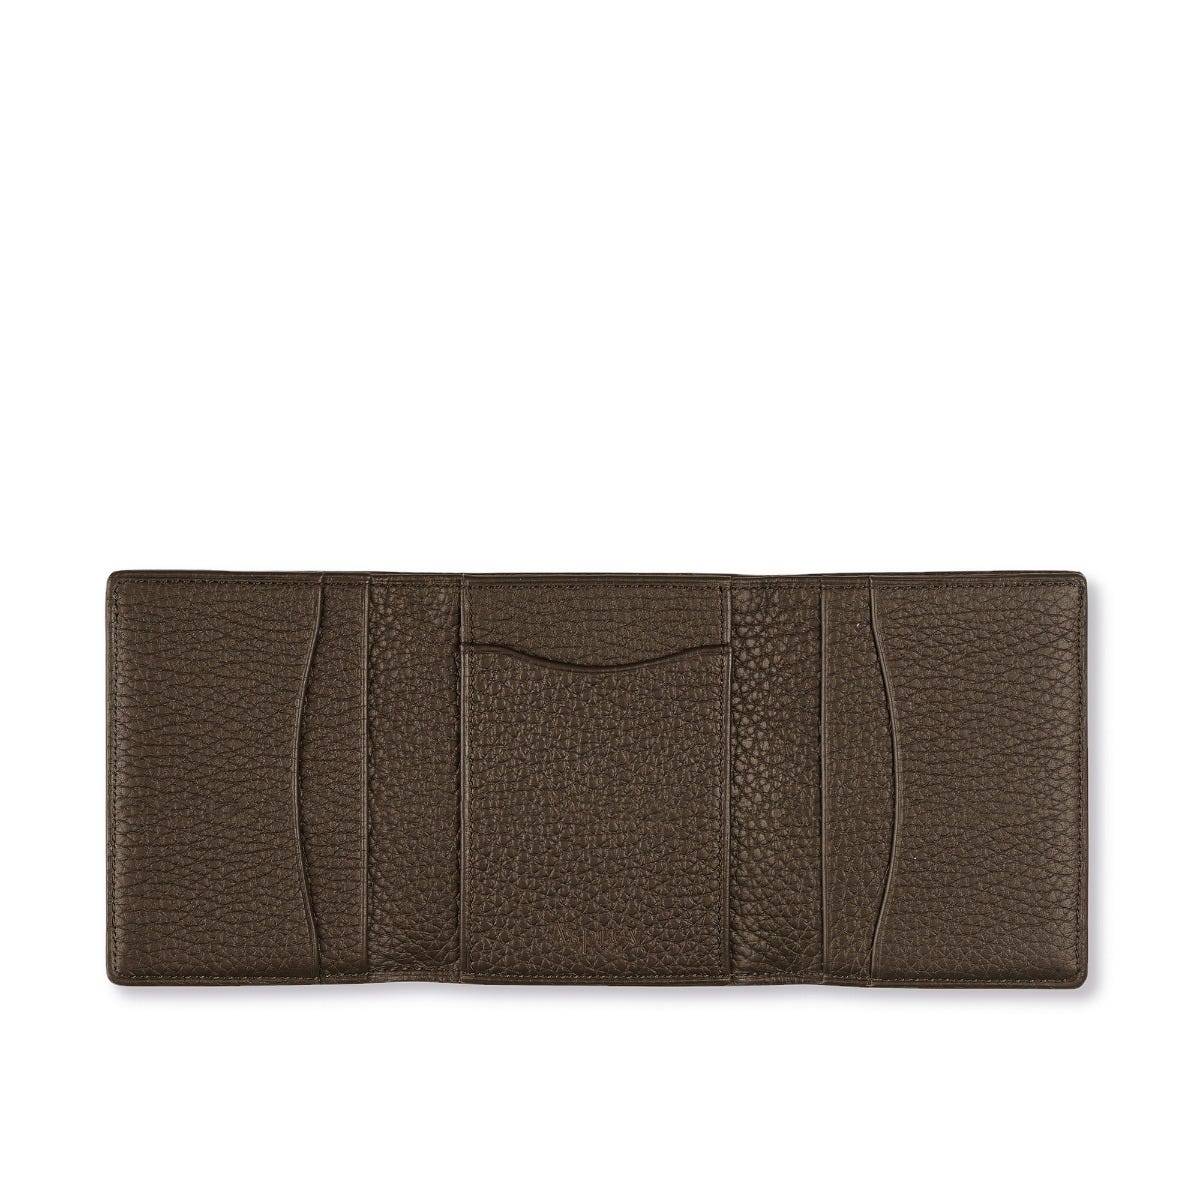 GMT Trifold Wallet in Soft Grain Leather